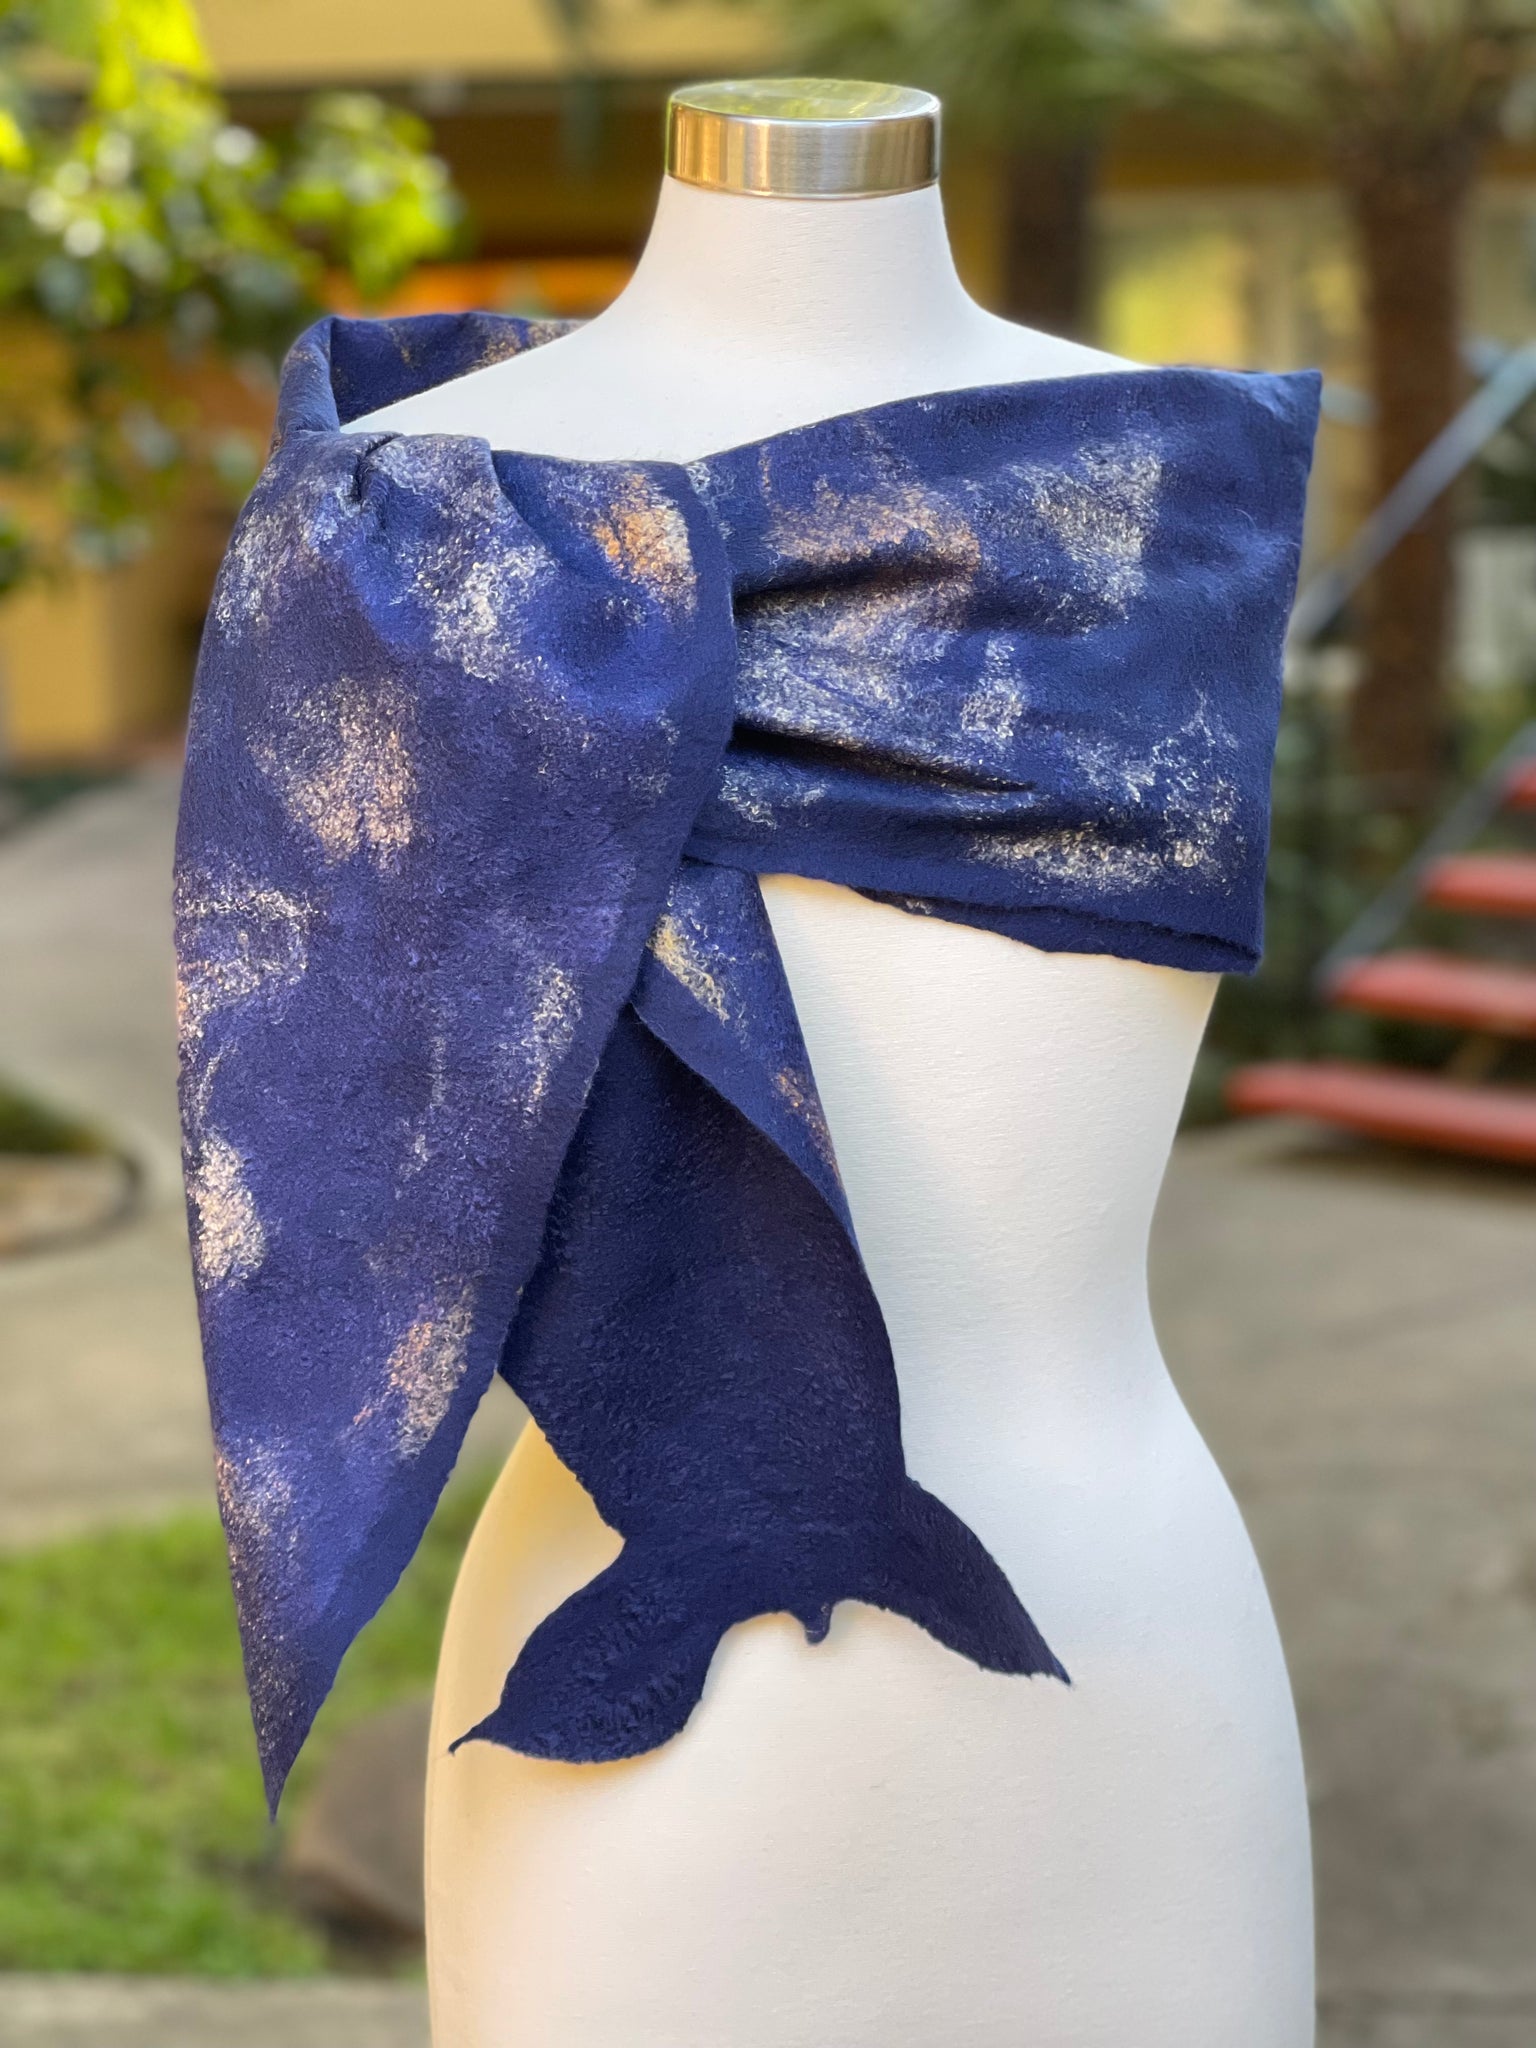 See Design Wool Scarf Small Totem Blue/Blue